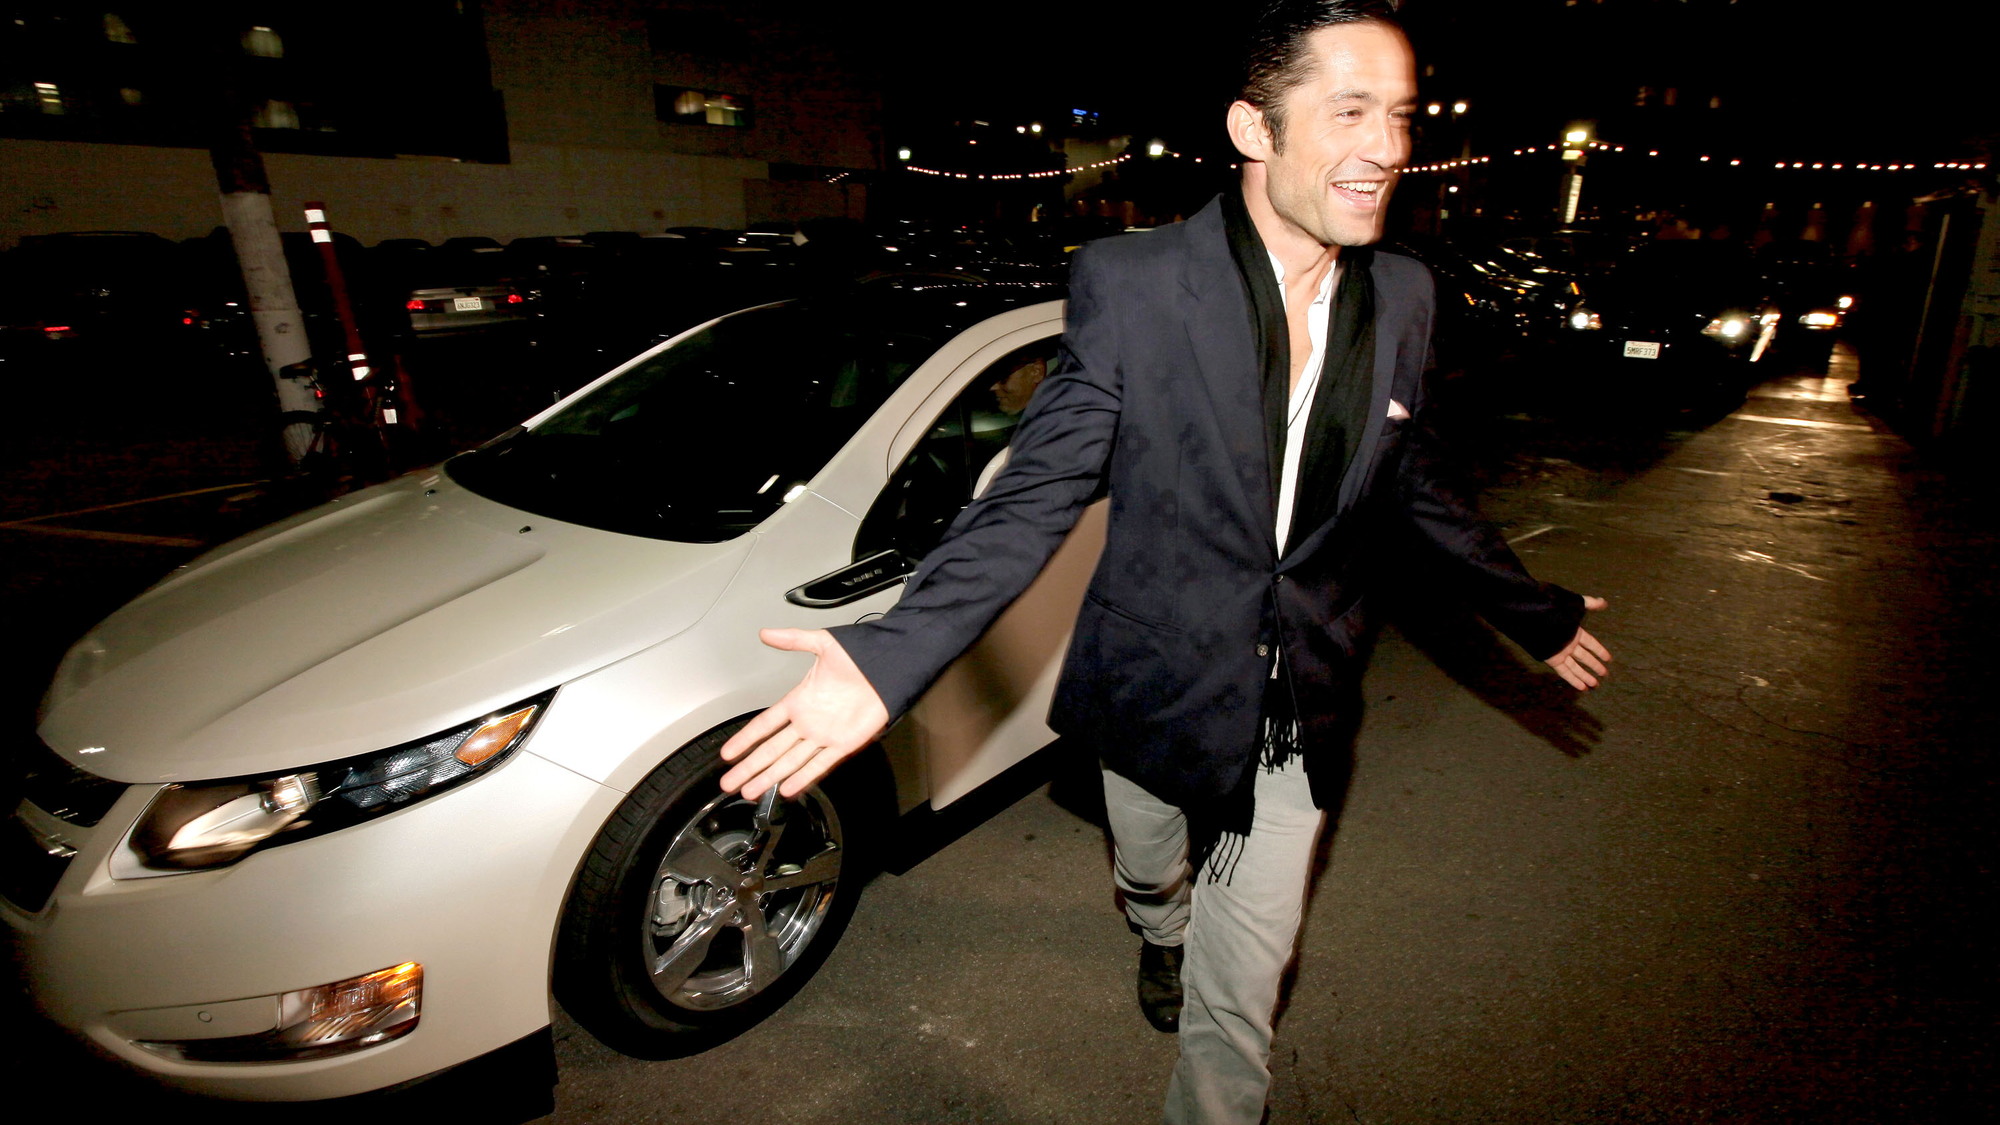 Enrique Murciano with 2011 Chevy Volt at Global Green Pre-Oscar Party, Feb 2011